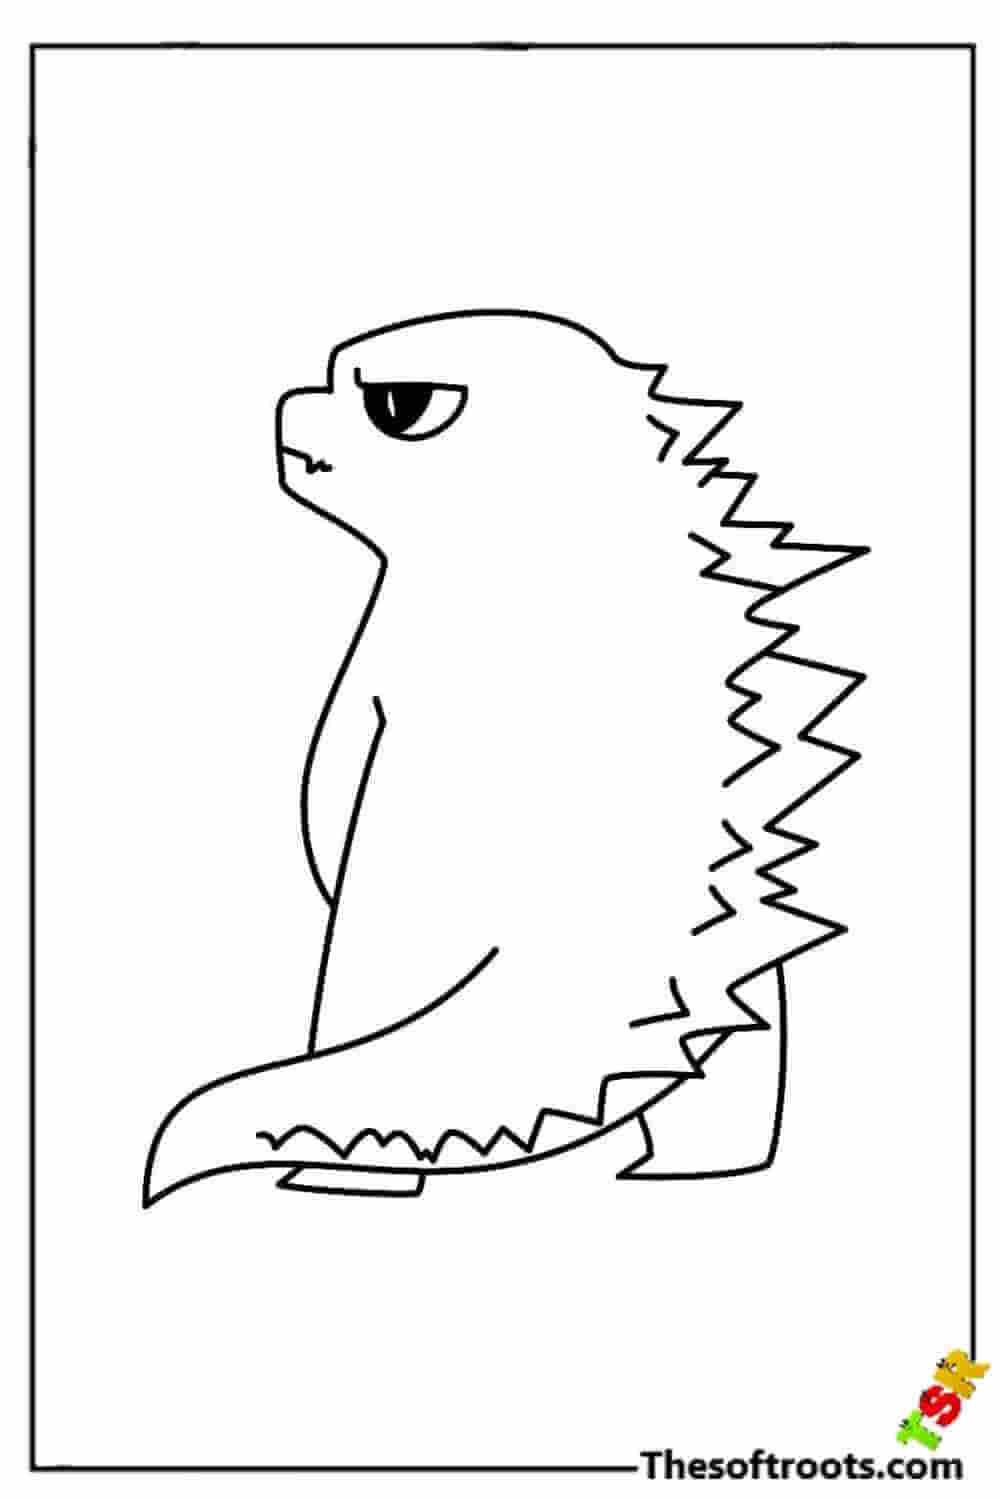 Godzilla coloring pages kids coloring pages